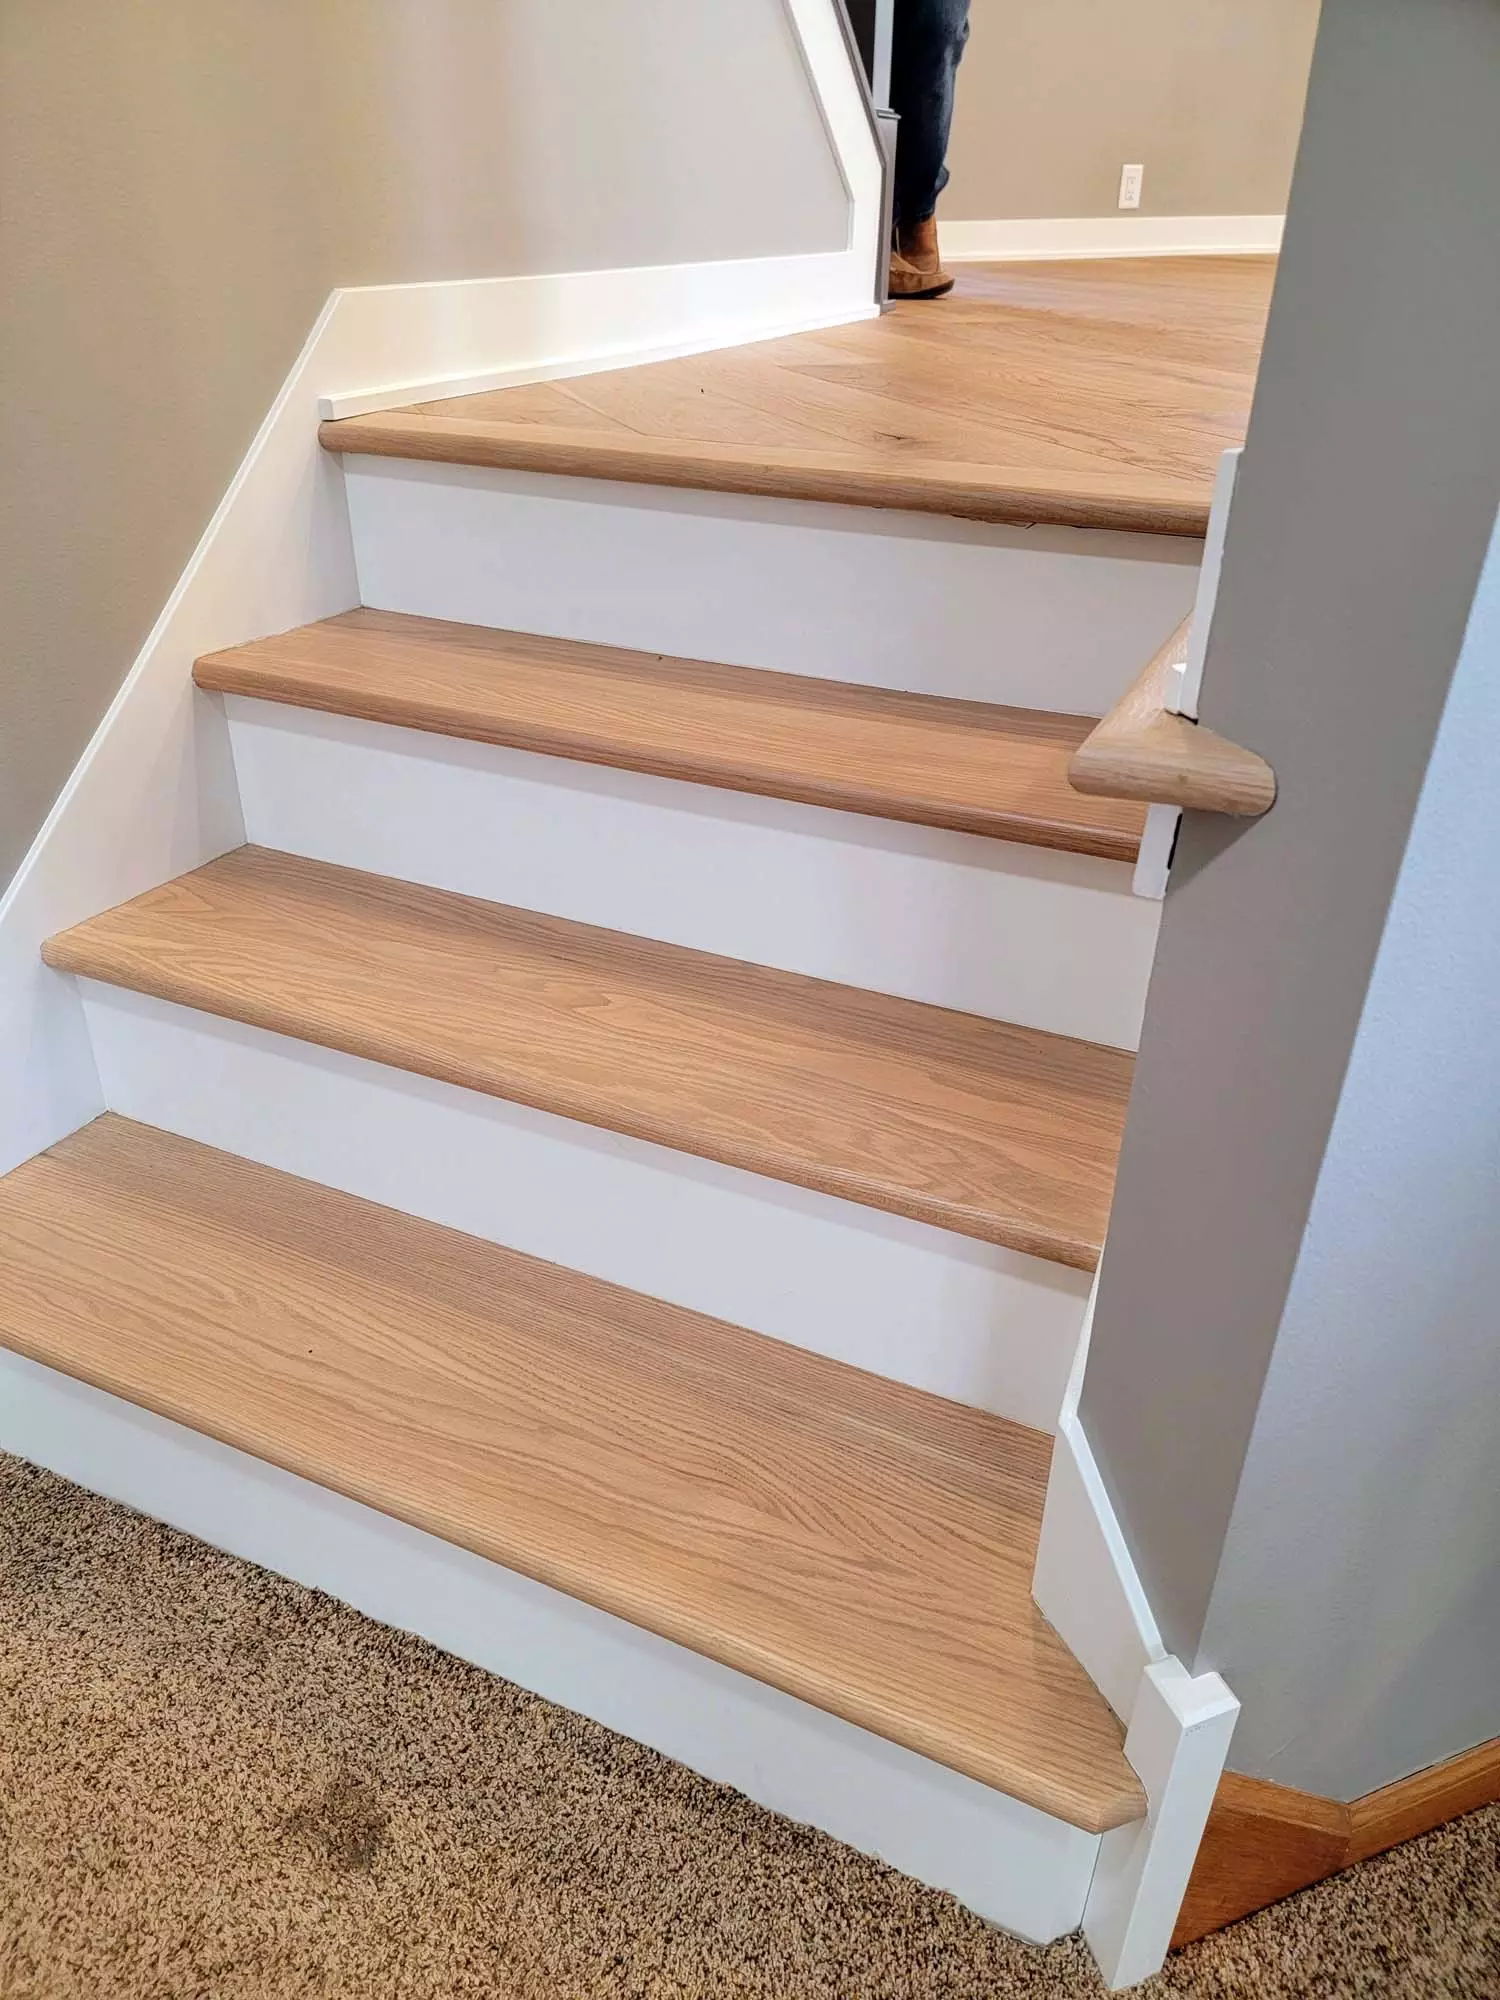 Solid Red Oak stair treads, custom matched to prefinished floors